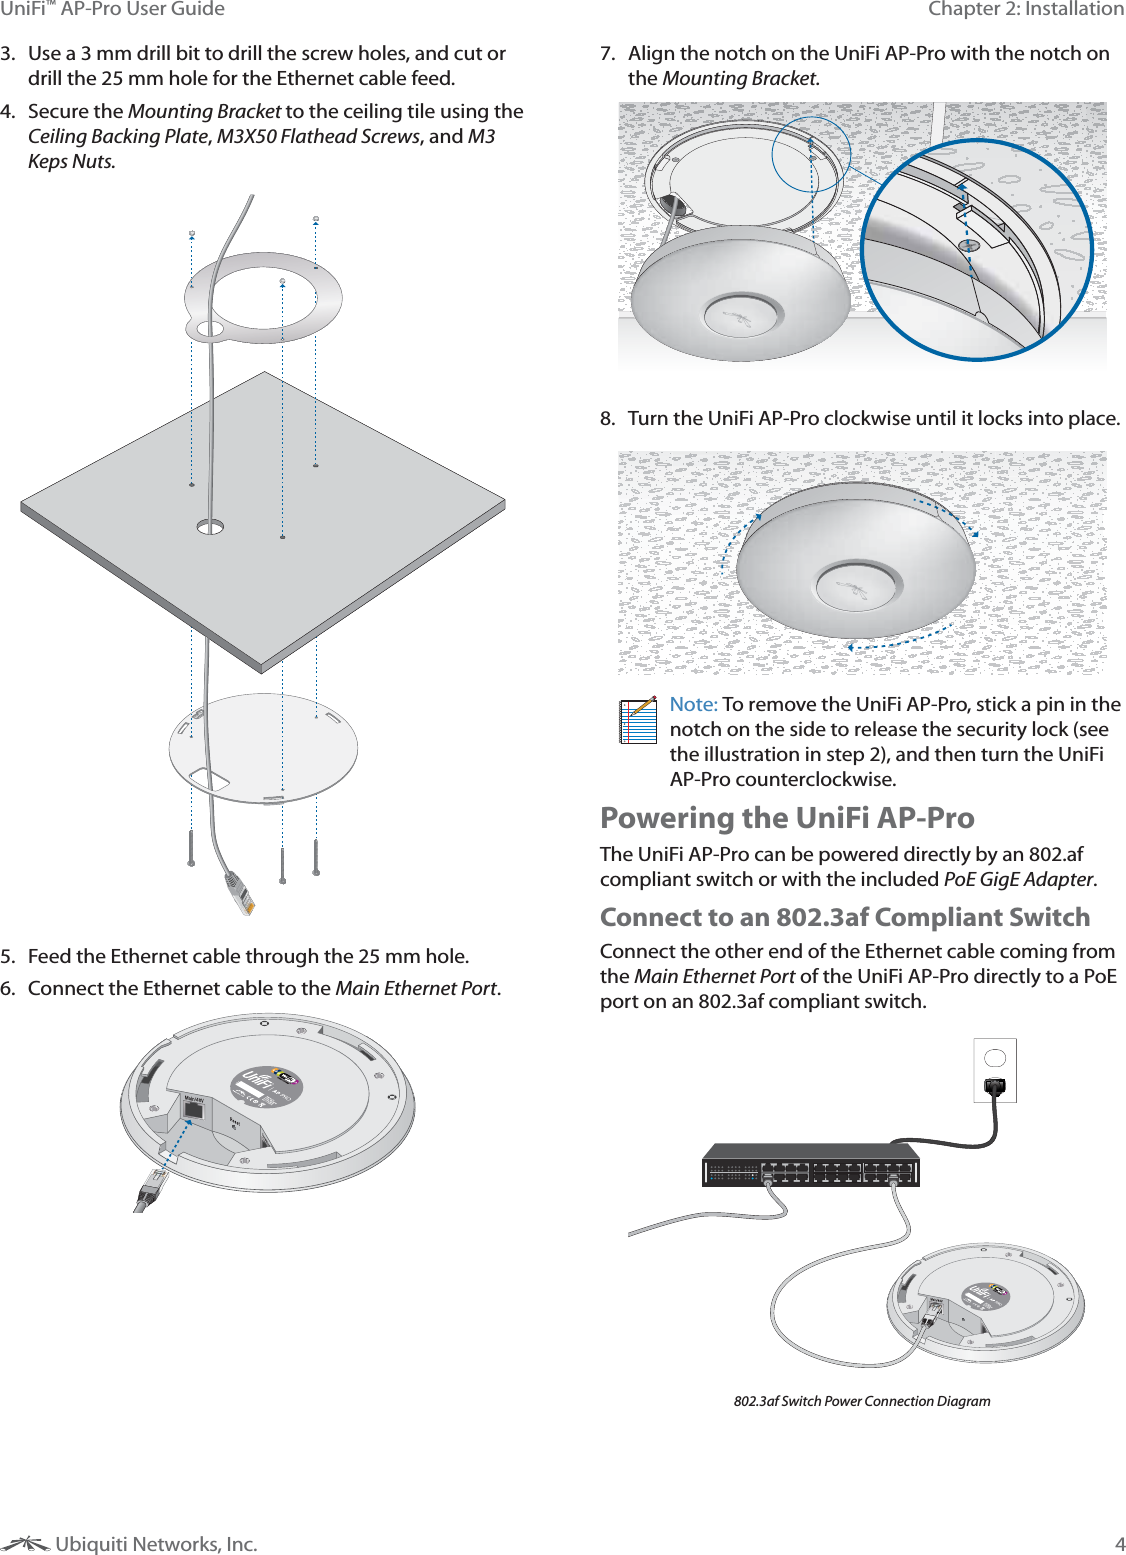 4Chapter 2: InstallationUniFi™ AP-Pro User Guide Ubiquiti Networks, Inc.3.  Use a 3 mm drill bit to drill the screw holes, and cut or drill the 25 mm hole for the Ethernet cable feed.4. Secure the Mounting Bracket to the ceiling tile using the Ceiling Backing Plate, M3X50 Flathead Screws, and M3 Keps Nuts.5.  Feed the Ethernet cable through the 25 mm hole.6.  Connect the Ethernet cable to the Main Ethernet Port. 7.  Align the notch on the UniFi AP-Pro with the notch on the Mounting Bracket.8.  Turn the UniFi AP-Pro clockwise until it locks into place.Note: To remove the UniFi AP-Pro, stick a pin in the notch on the side to release the security lock (see the illustration in step 2), and then turn the UniFi AP-Pro counterclockwise.Powering the UniFi AP-ProThe UniFi AP-Pro can be powered directly by an 802.af compliant switch or with the included PoE GigE Adapter.Connect to an 802.3af Compliant SwitchConnect the other end of the Ethernet cable coming from the Main Ethernet Port of the UniFi AP-Pro directly to a PoE port on an 802.3af compliant switch.802.3af Switch Power Connection Diagram